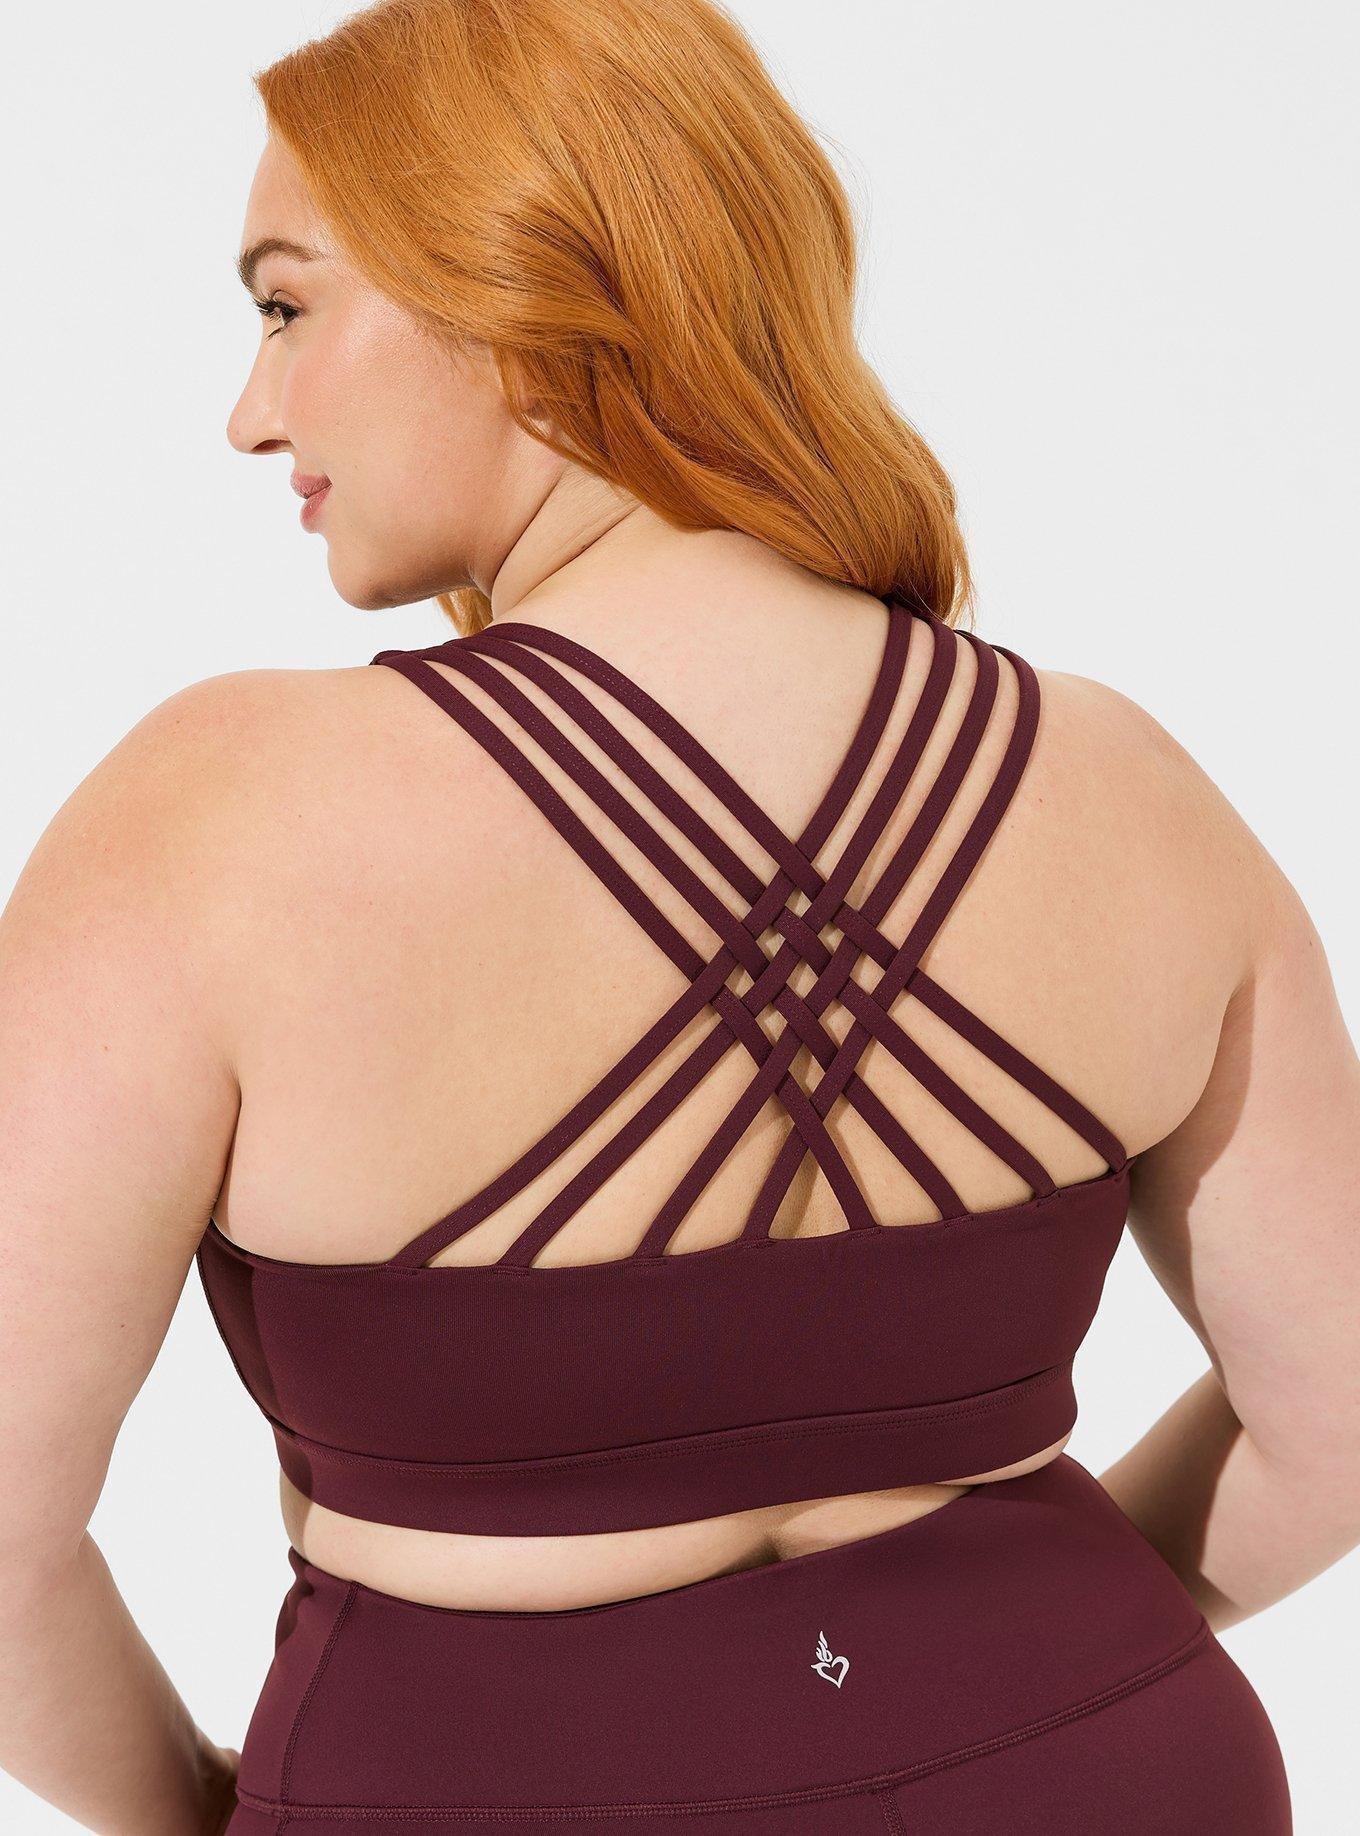  Core 10 Women's Low Impact Sports Bra (Available in Plus Size),  Dark Burgundy, 1X : Clothing, Shoes & Jewelry